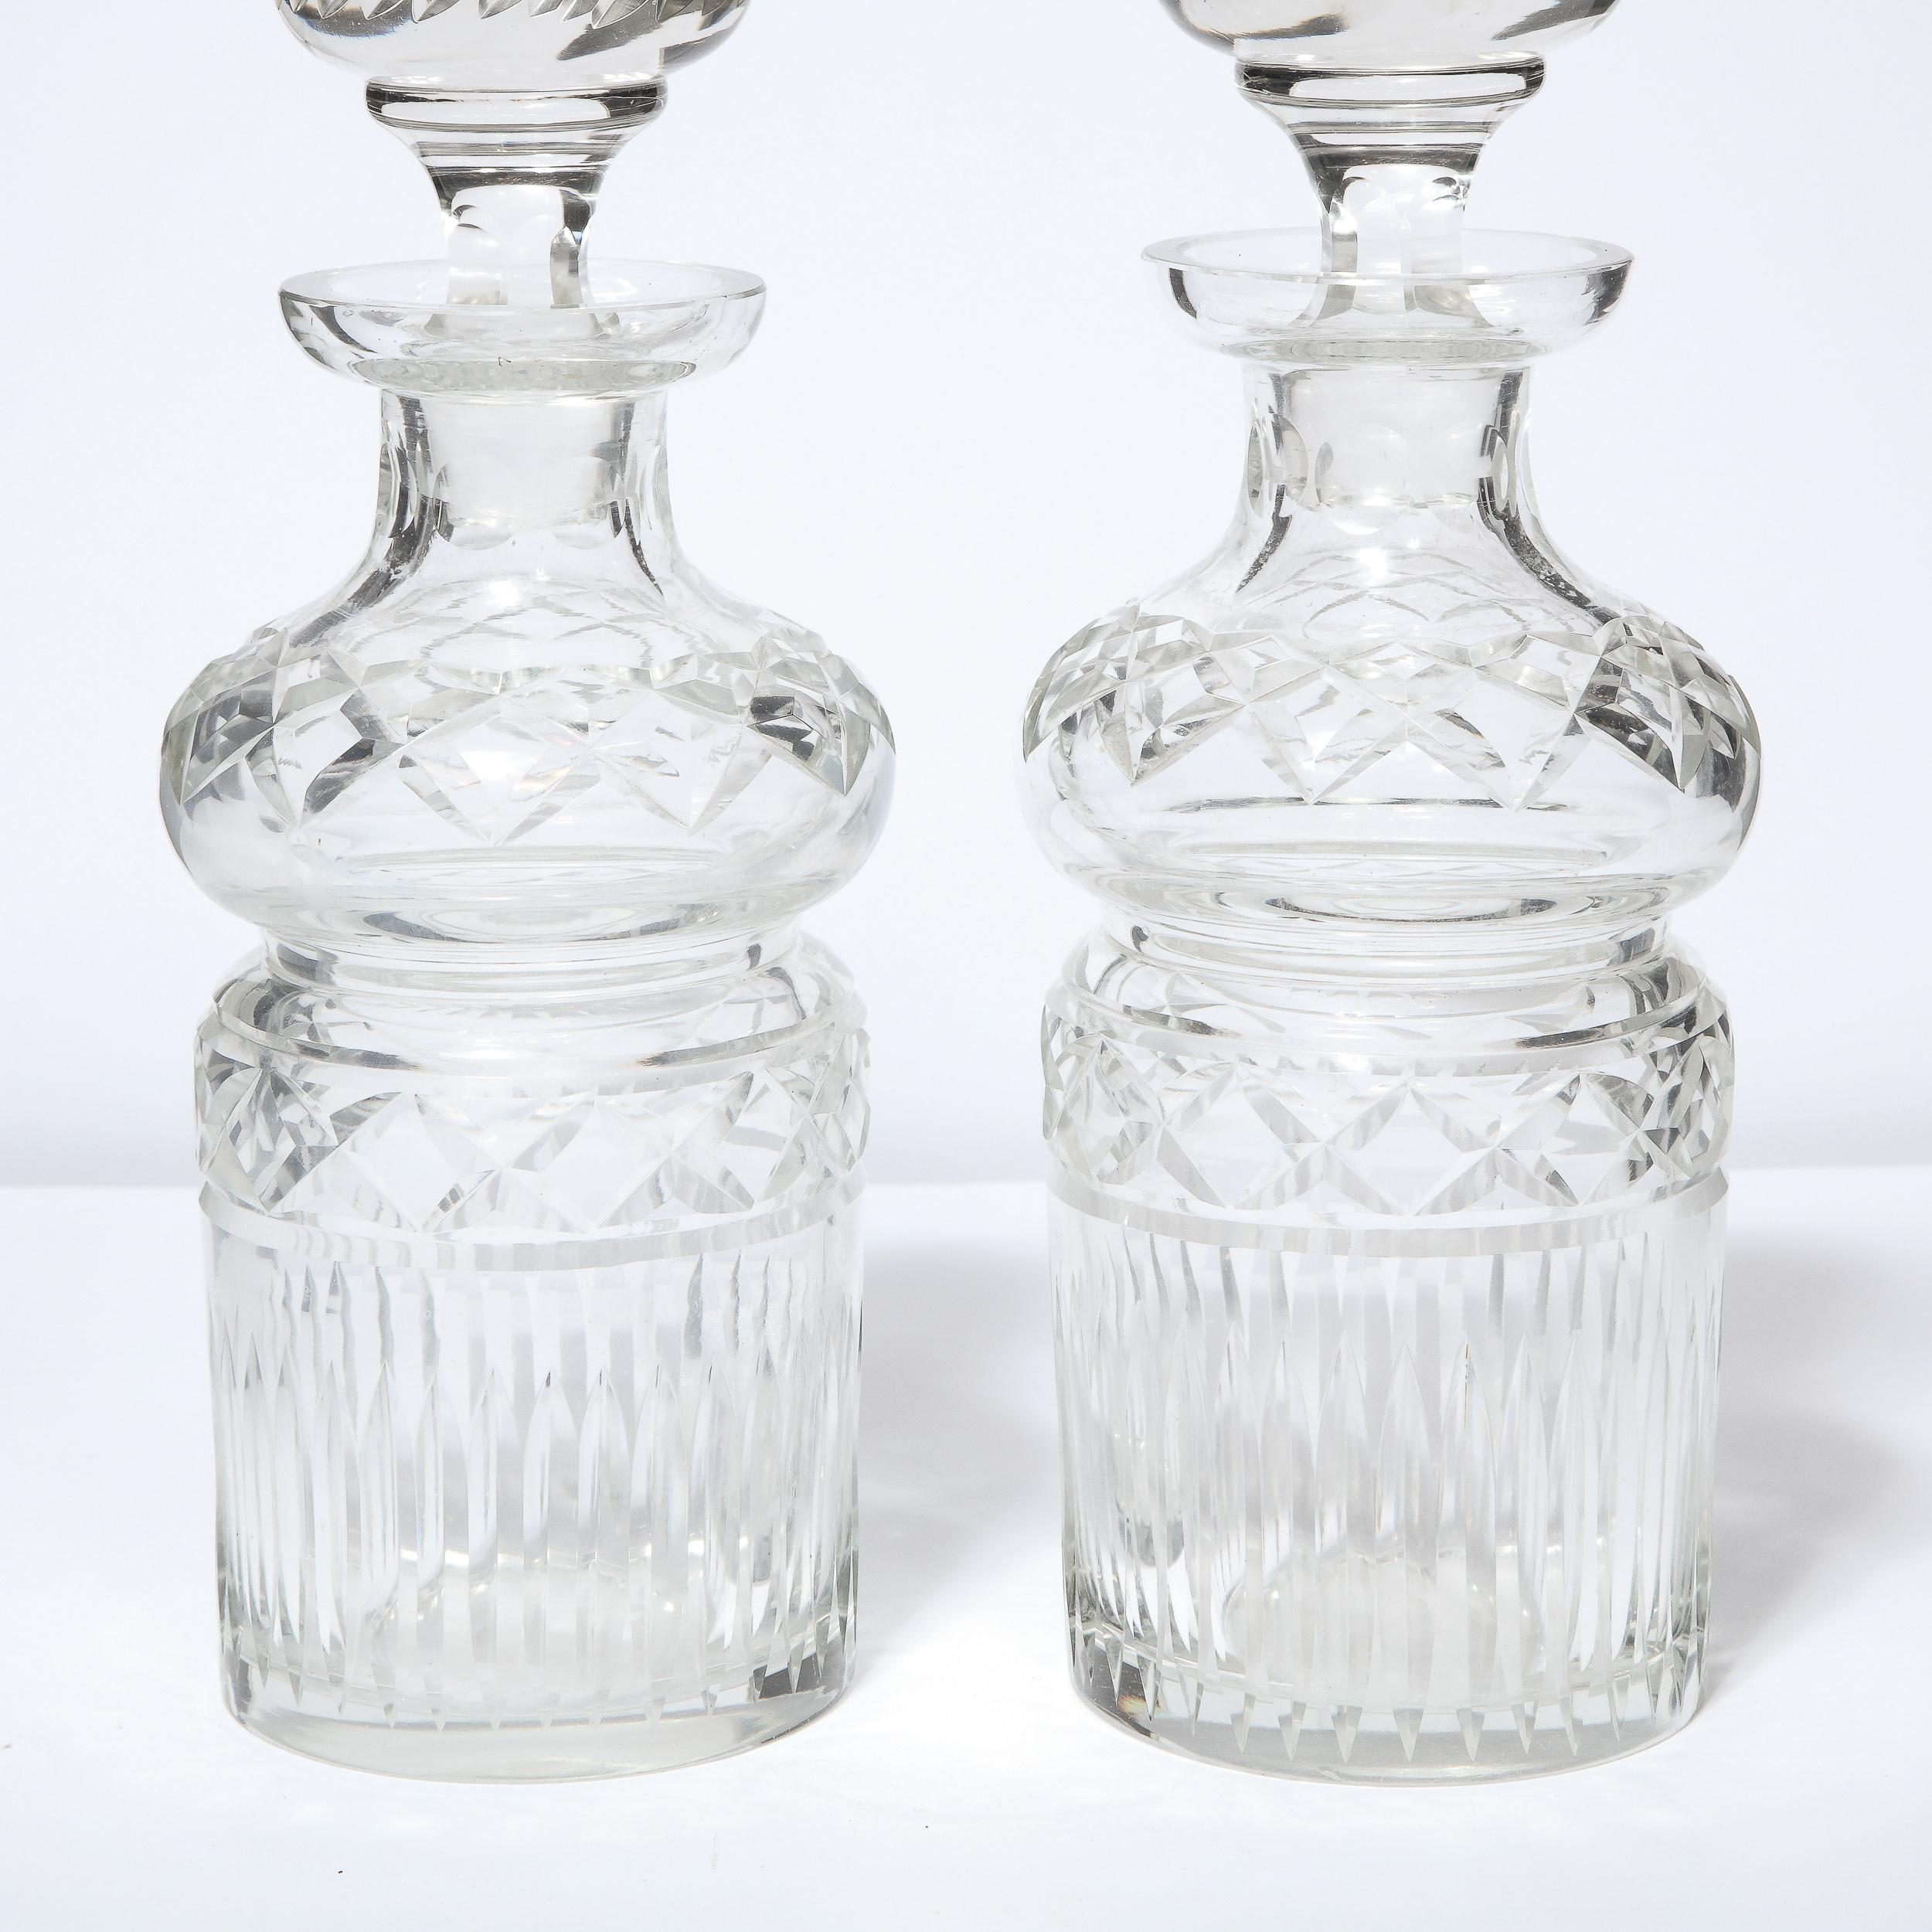 American Pair of Mid-Century Modern Etched Translucent Crystal Decanters